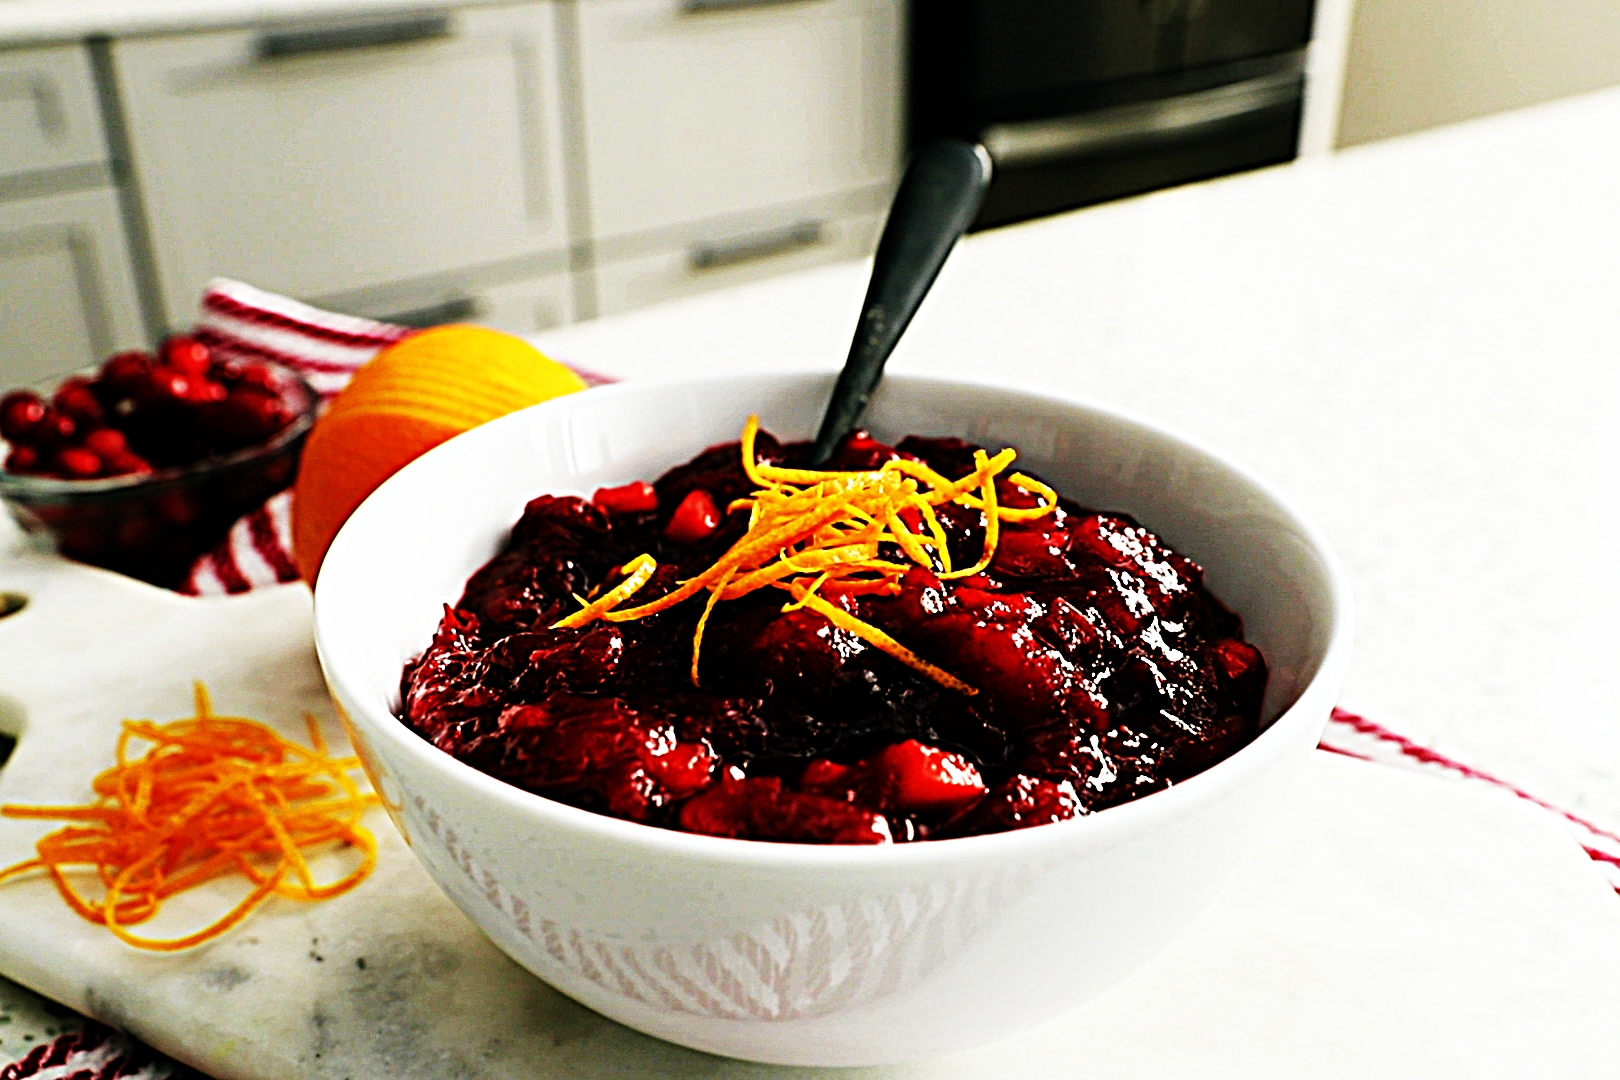 Stupid-Easy Recipe for Apple and Spice Cranberry Sauce (#1 Top-Rated)